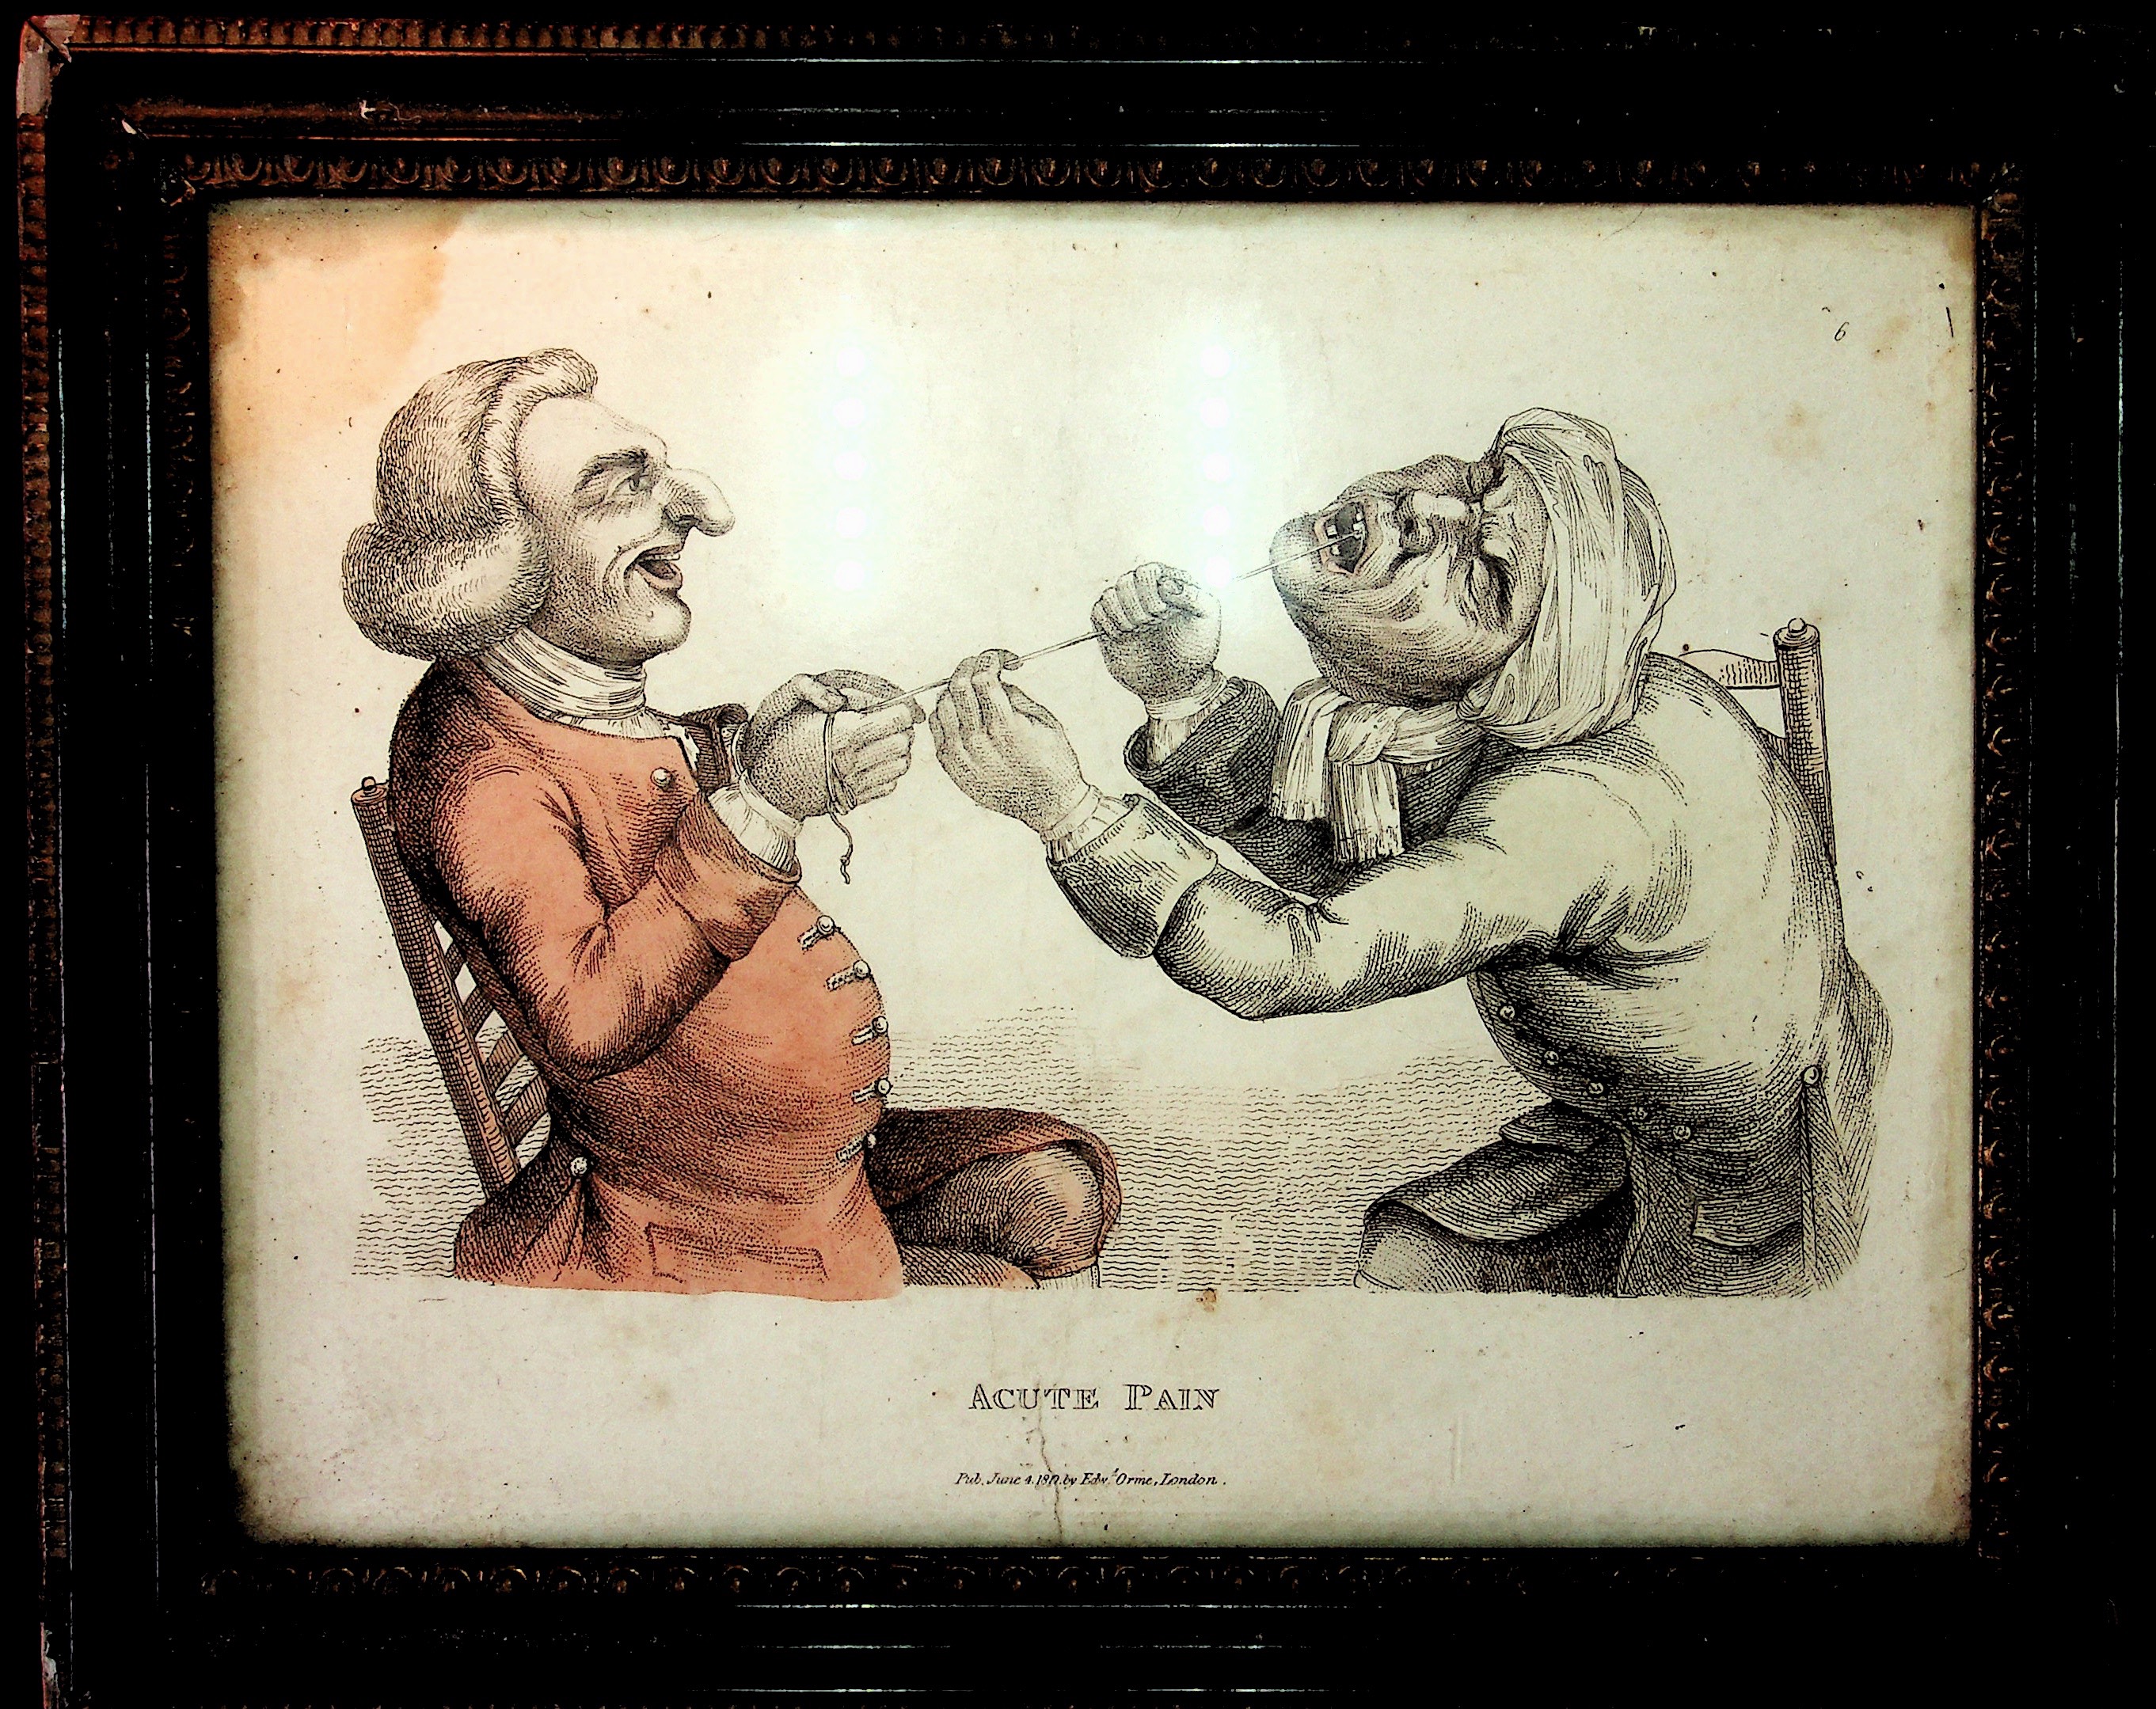 Acute Pain a hand coloured engraving from 1810 by Edward Orme, London